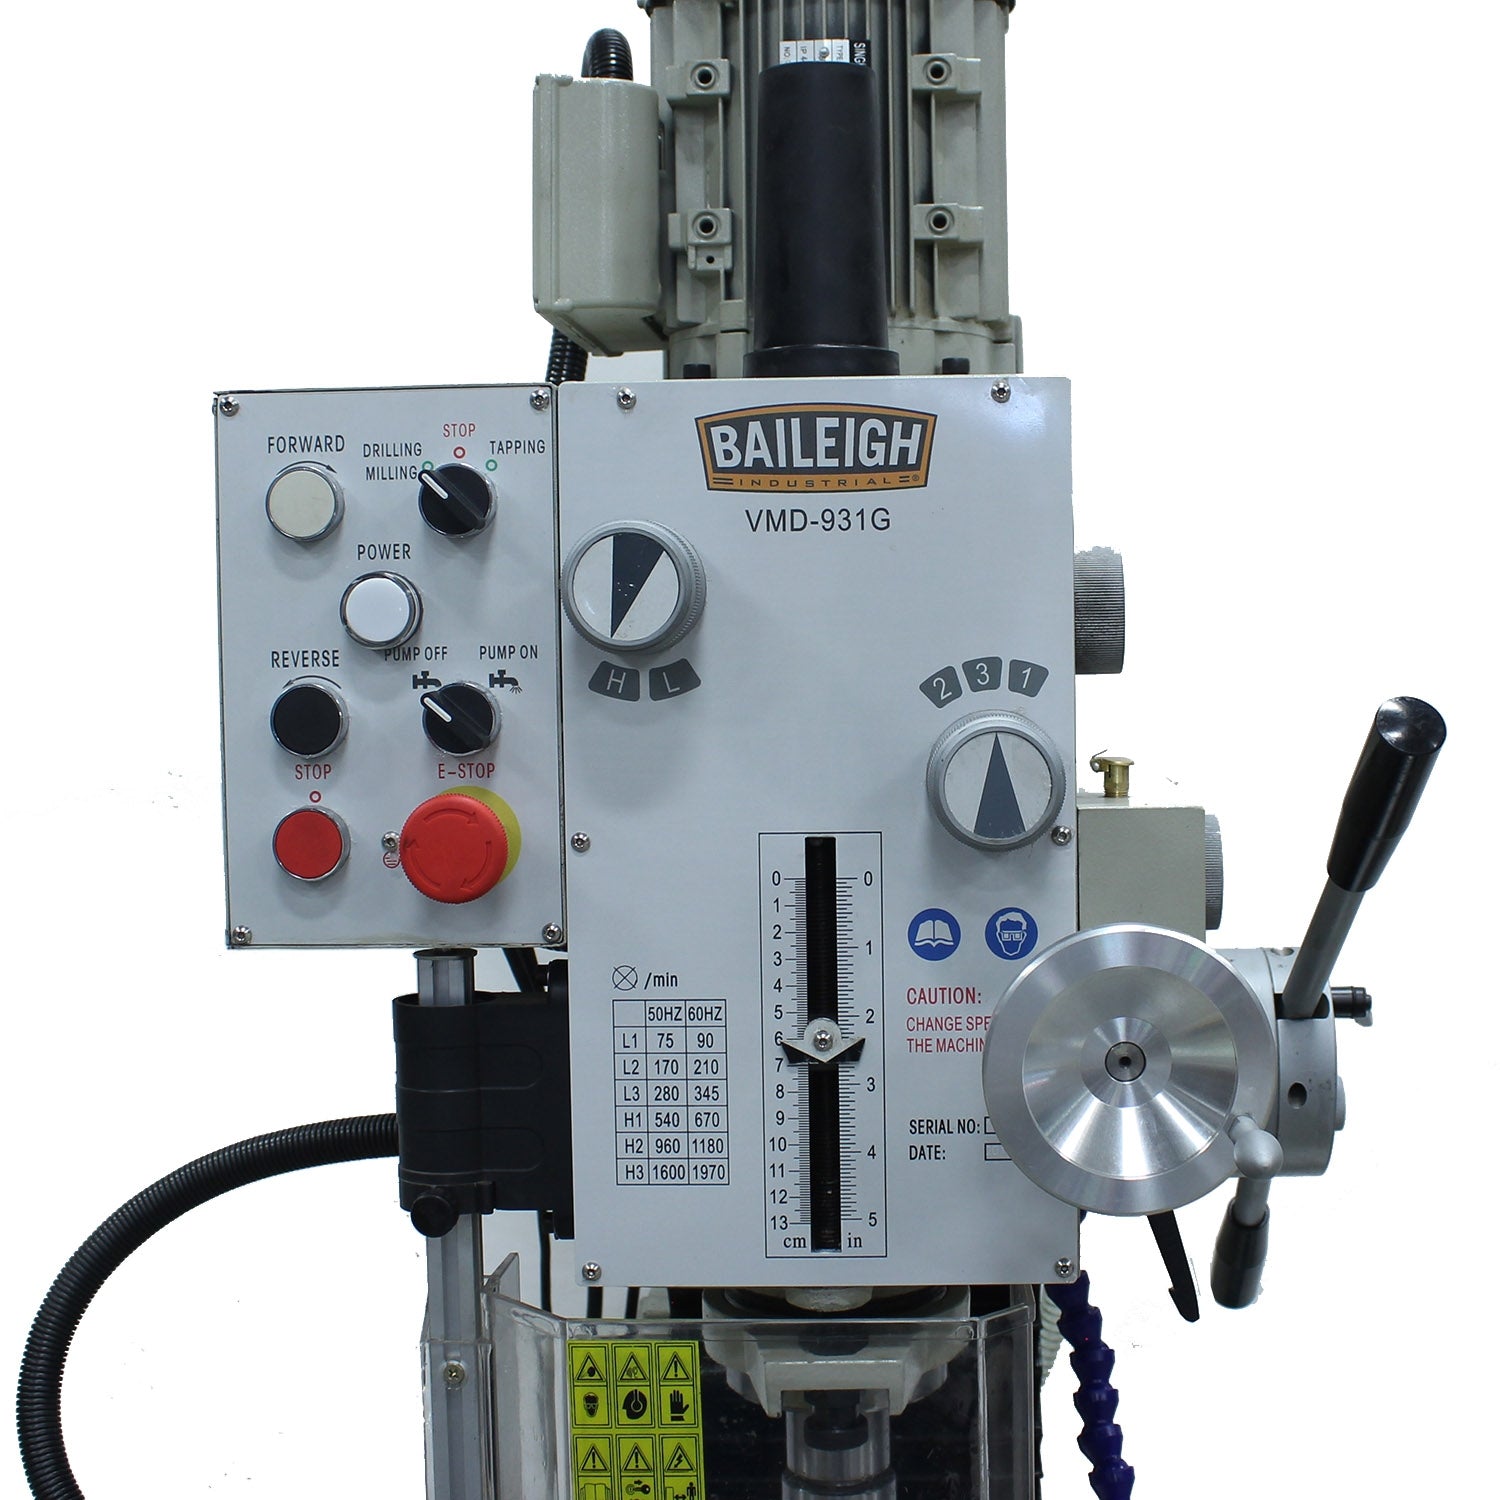 Baileigh VMD-931G 110V Gear Driven Mill and Drill, Includes Stand, Coolant System, Work Light, Power X, and R8 Spindle